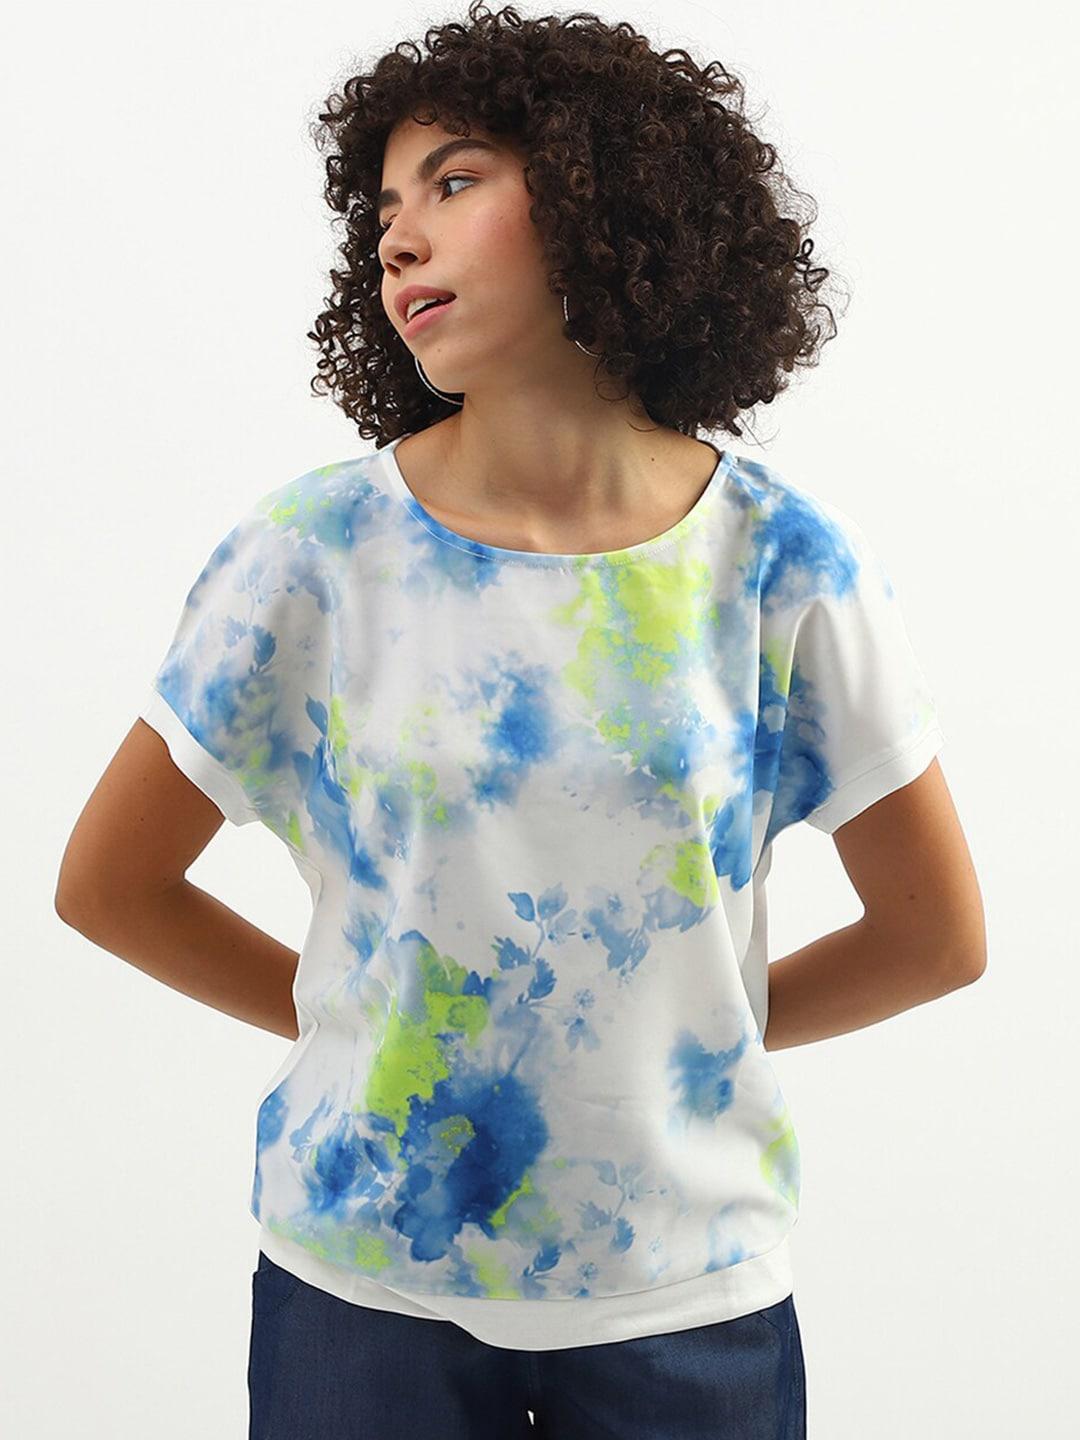 united-colors-of-benetton-multicoloured-tie-and-dye-print-top